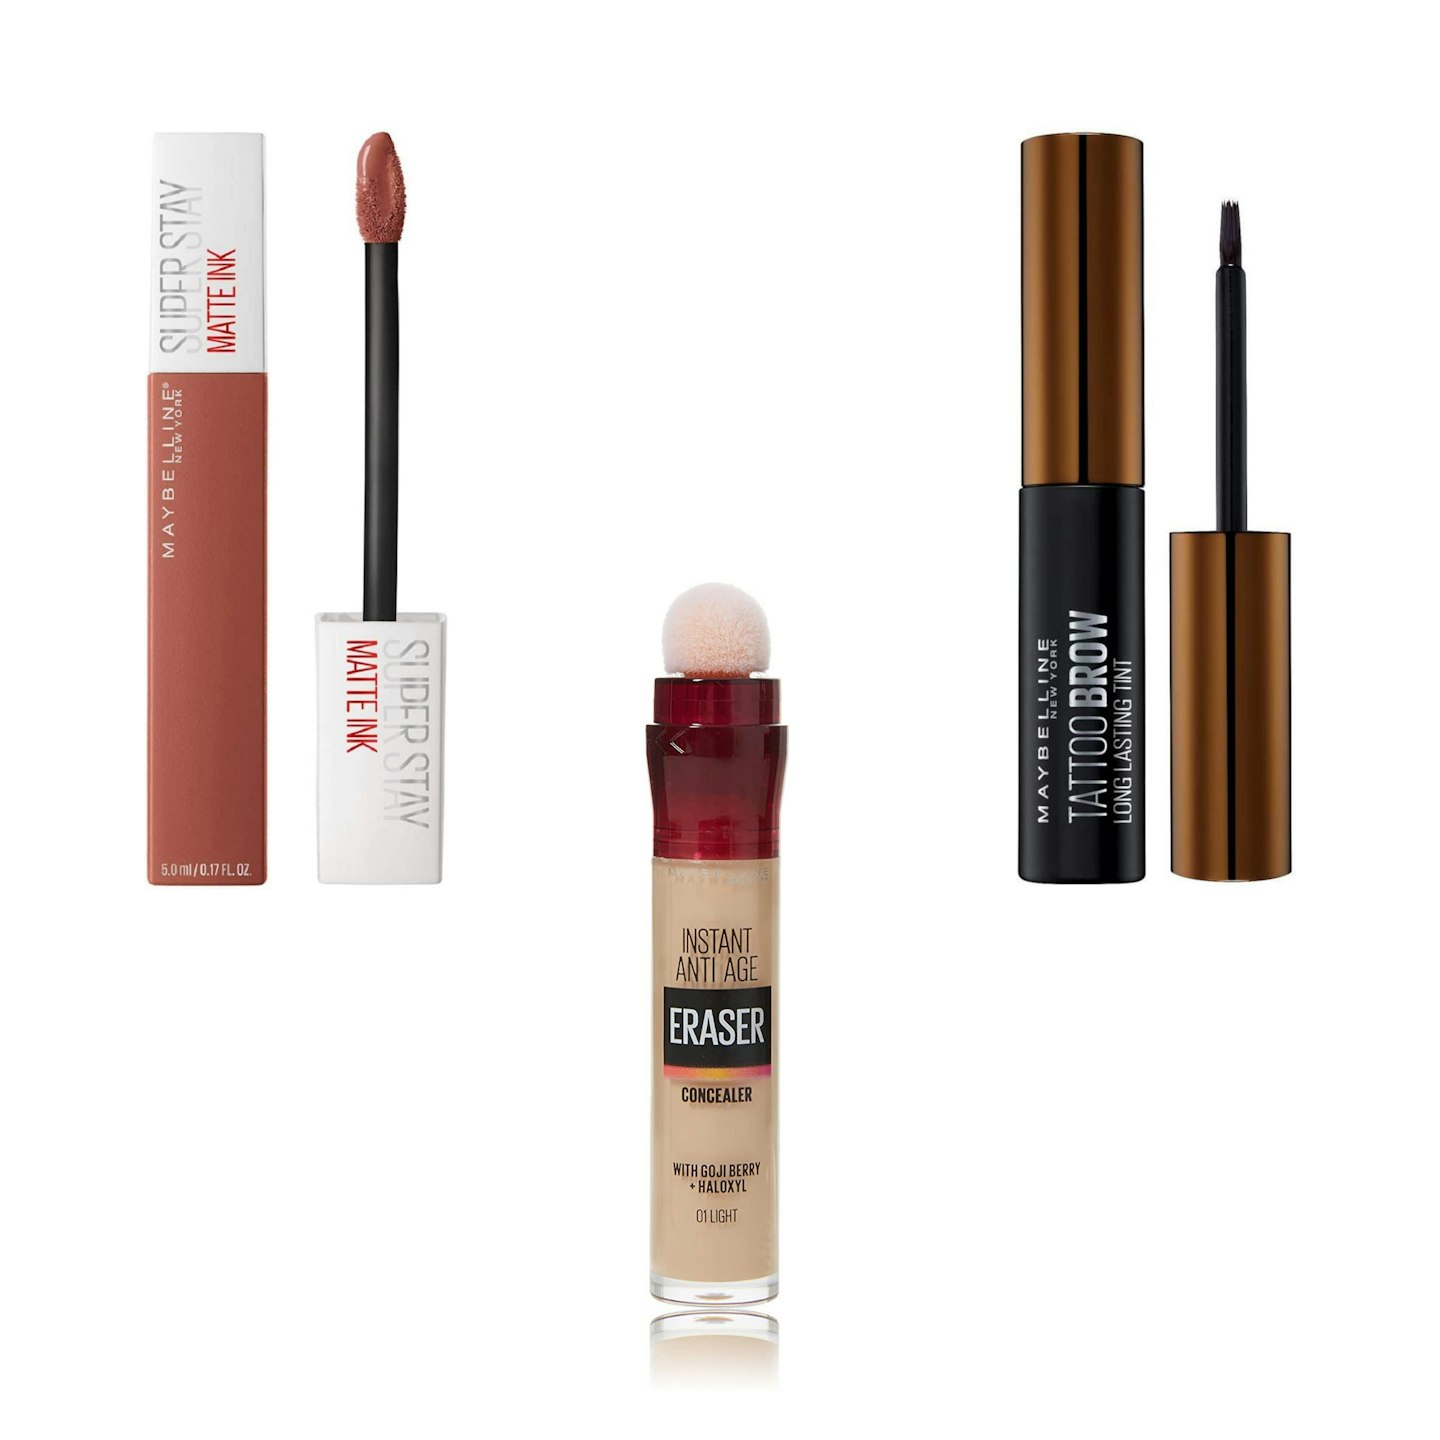 Up to 45% off Maybelline Make Up